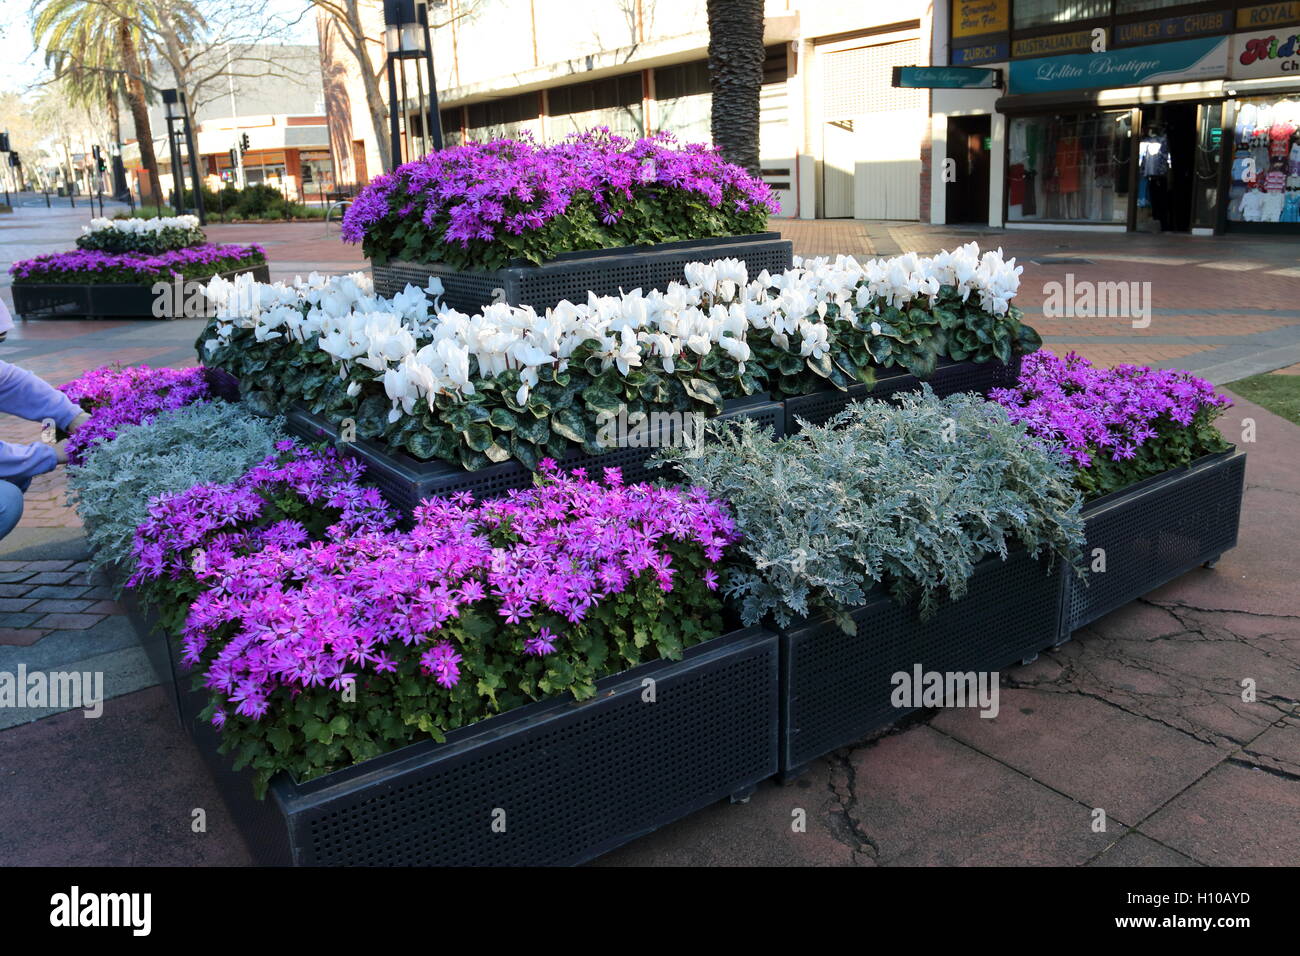 Purple Daisies and White cyclamen on display Stock Photo